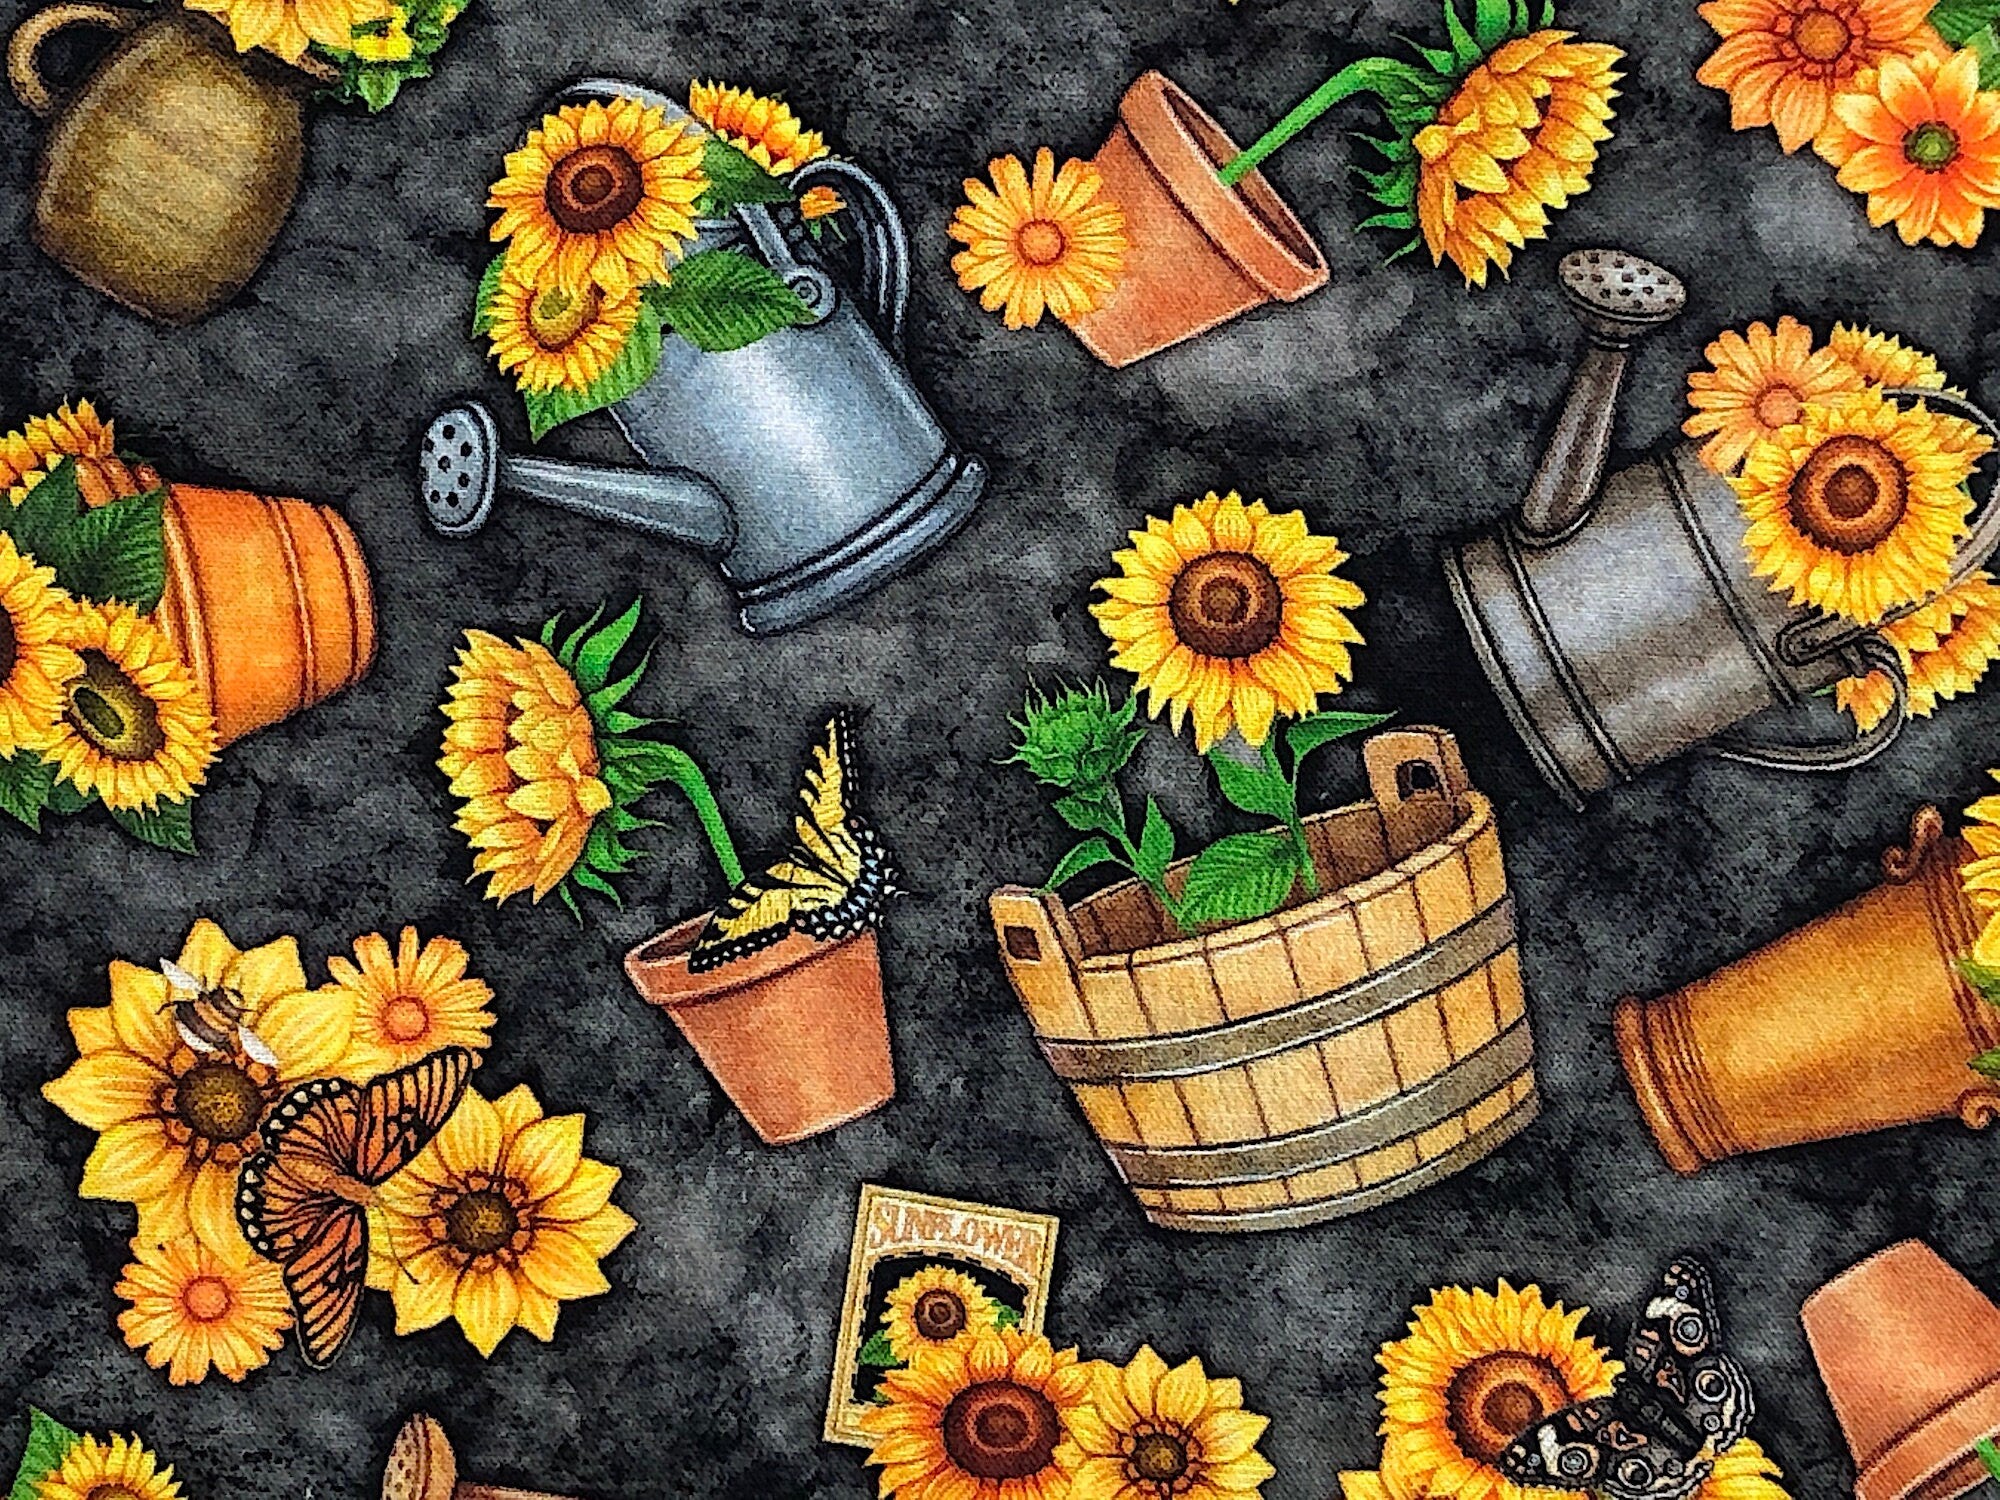 Close up of sunflowers, watering cans, butterflies and more.